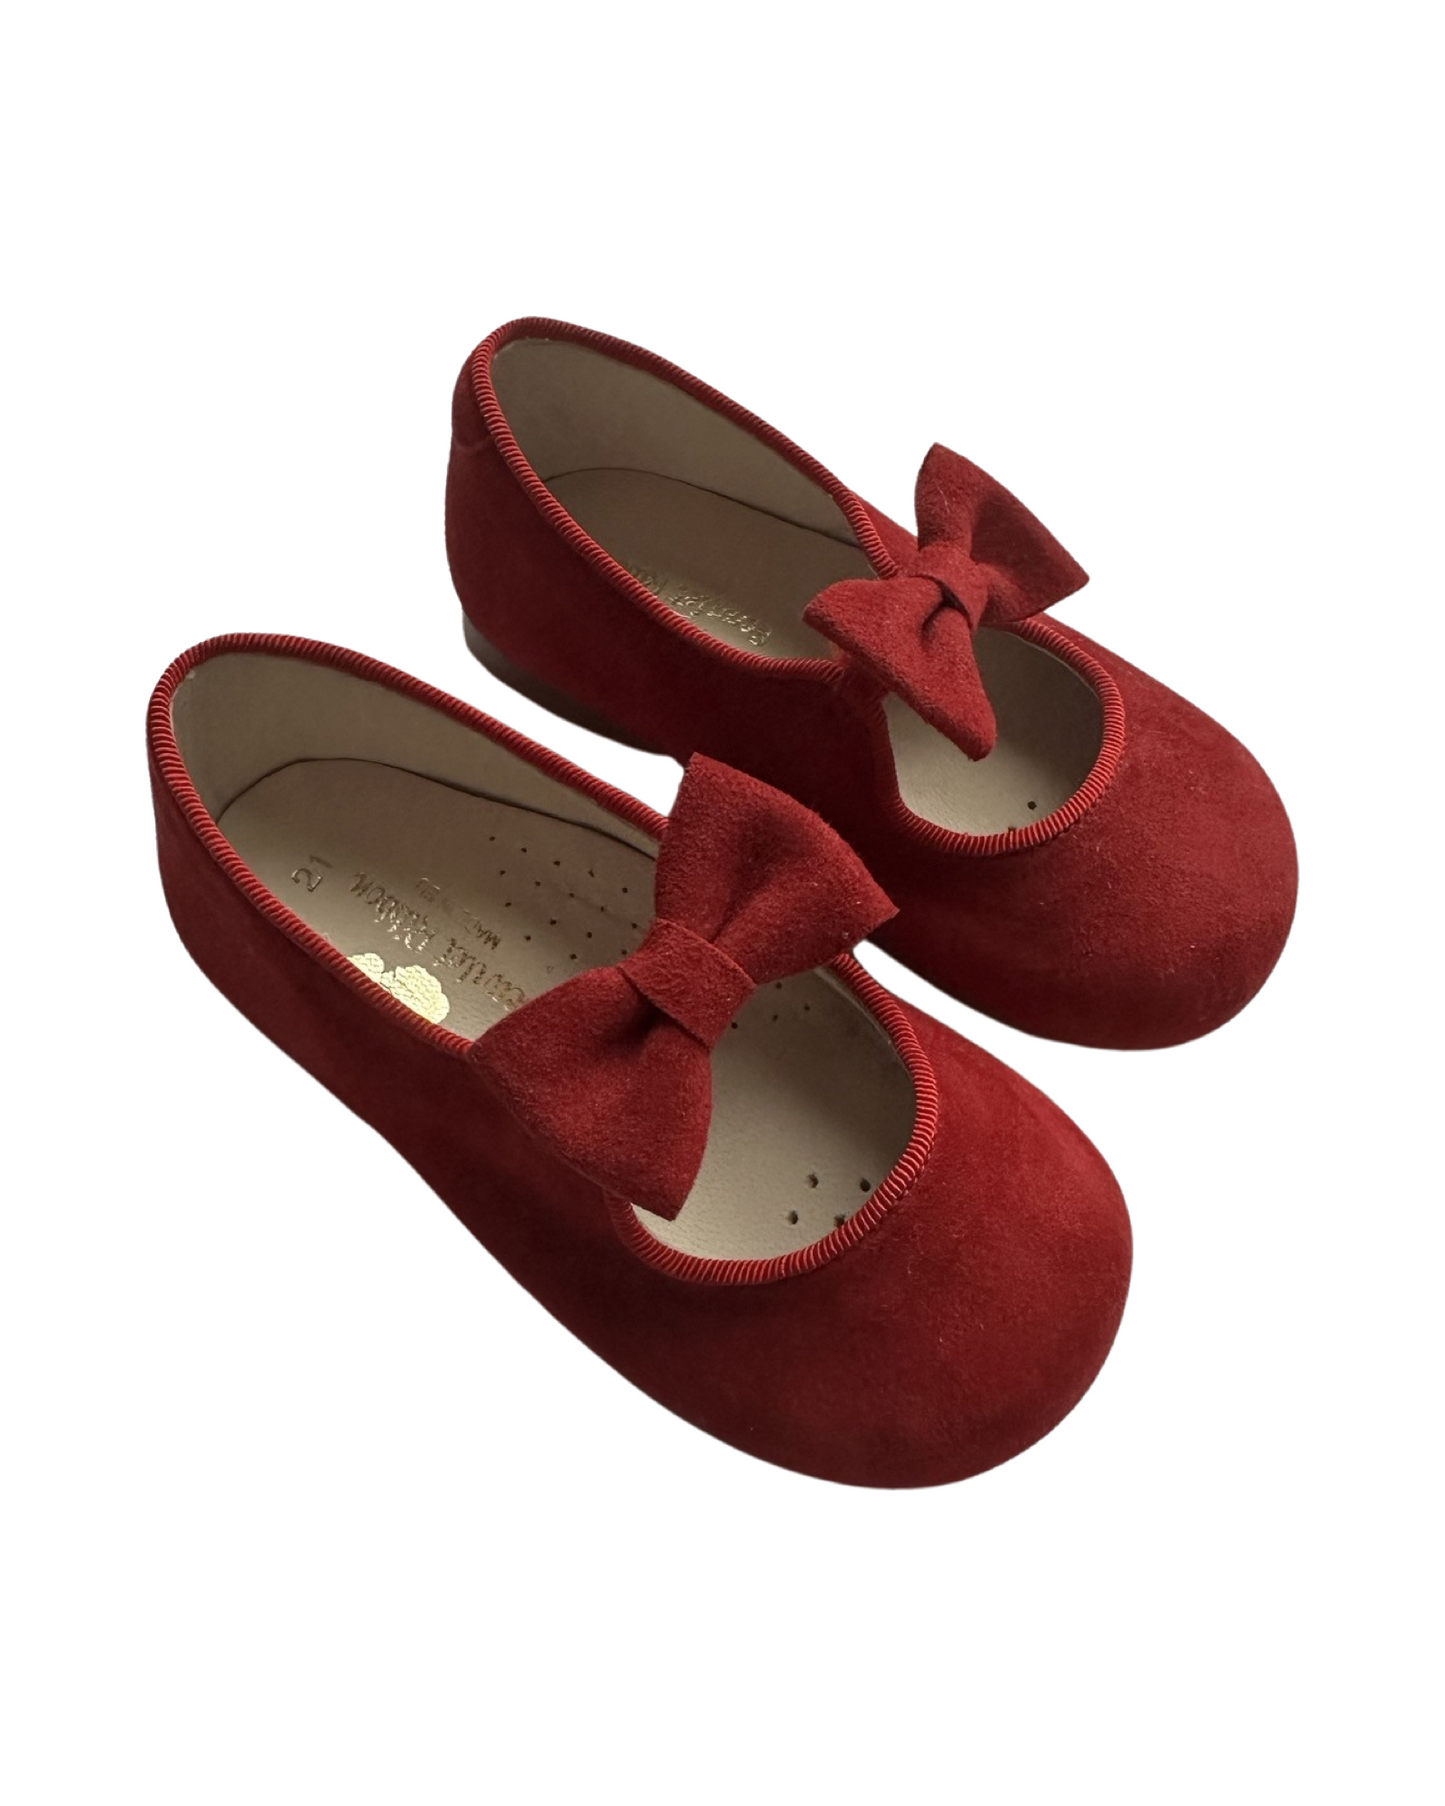 Scarlet Ribbon red suede bow toddler shoes (size UK5/EU21)